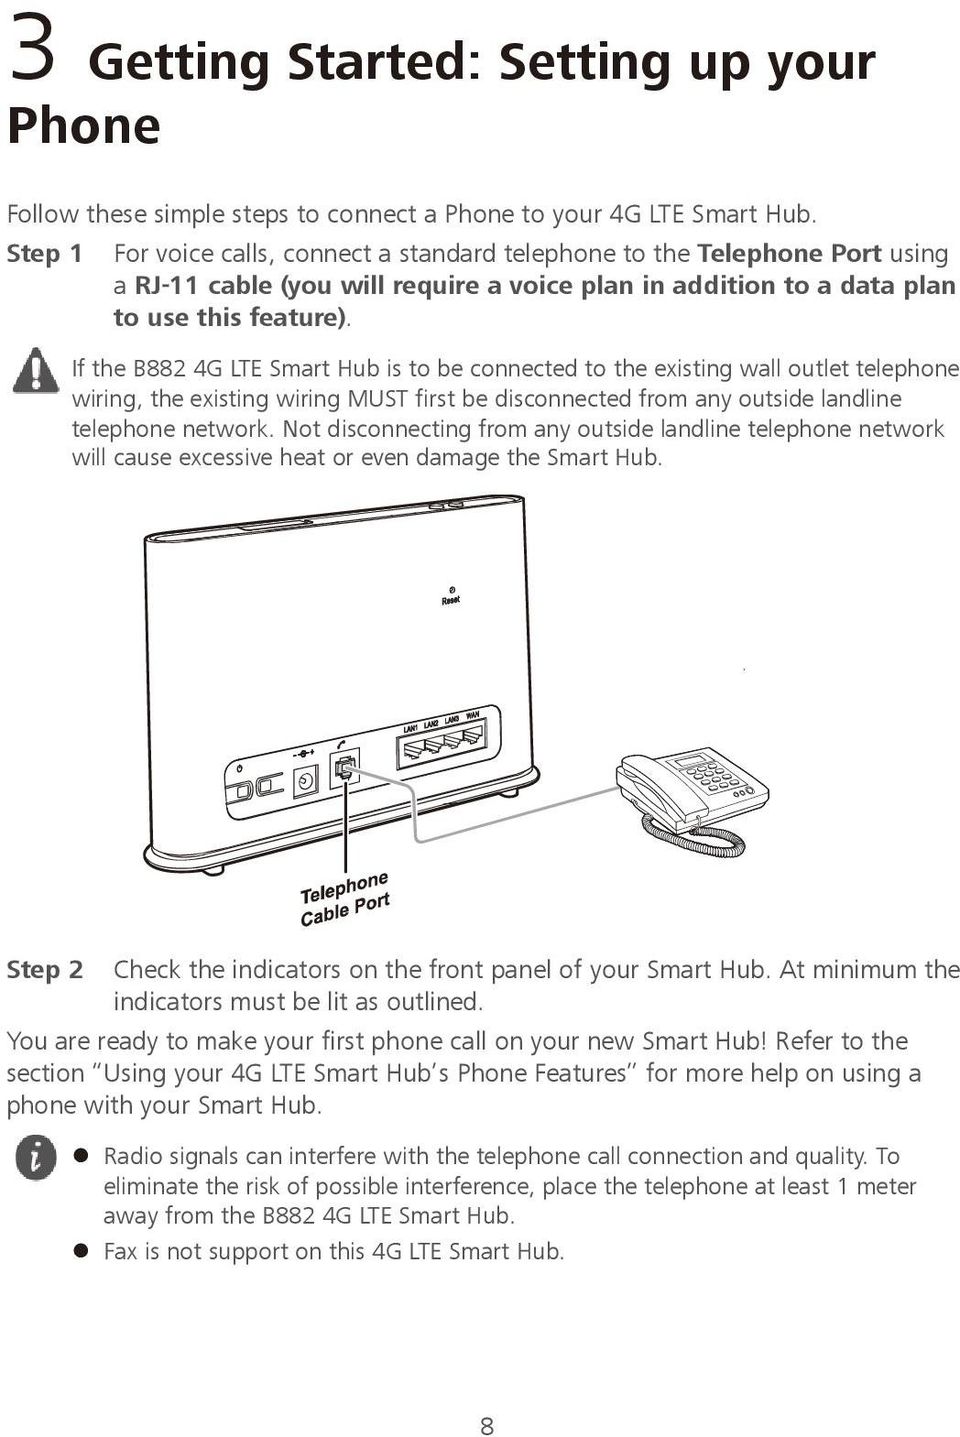 If the B882 4G LTE Smart Hub is to be connected to the existing wall outlet telephone wiring, the existing wiring MUST first be disconnected from any outside landline telephone network.